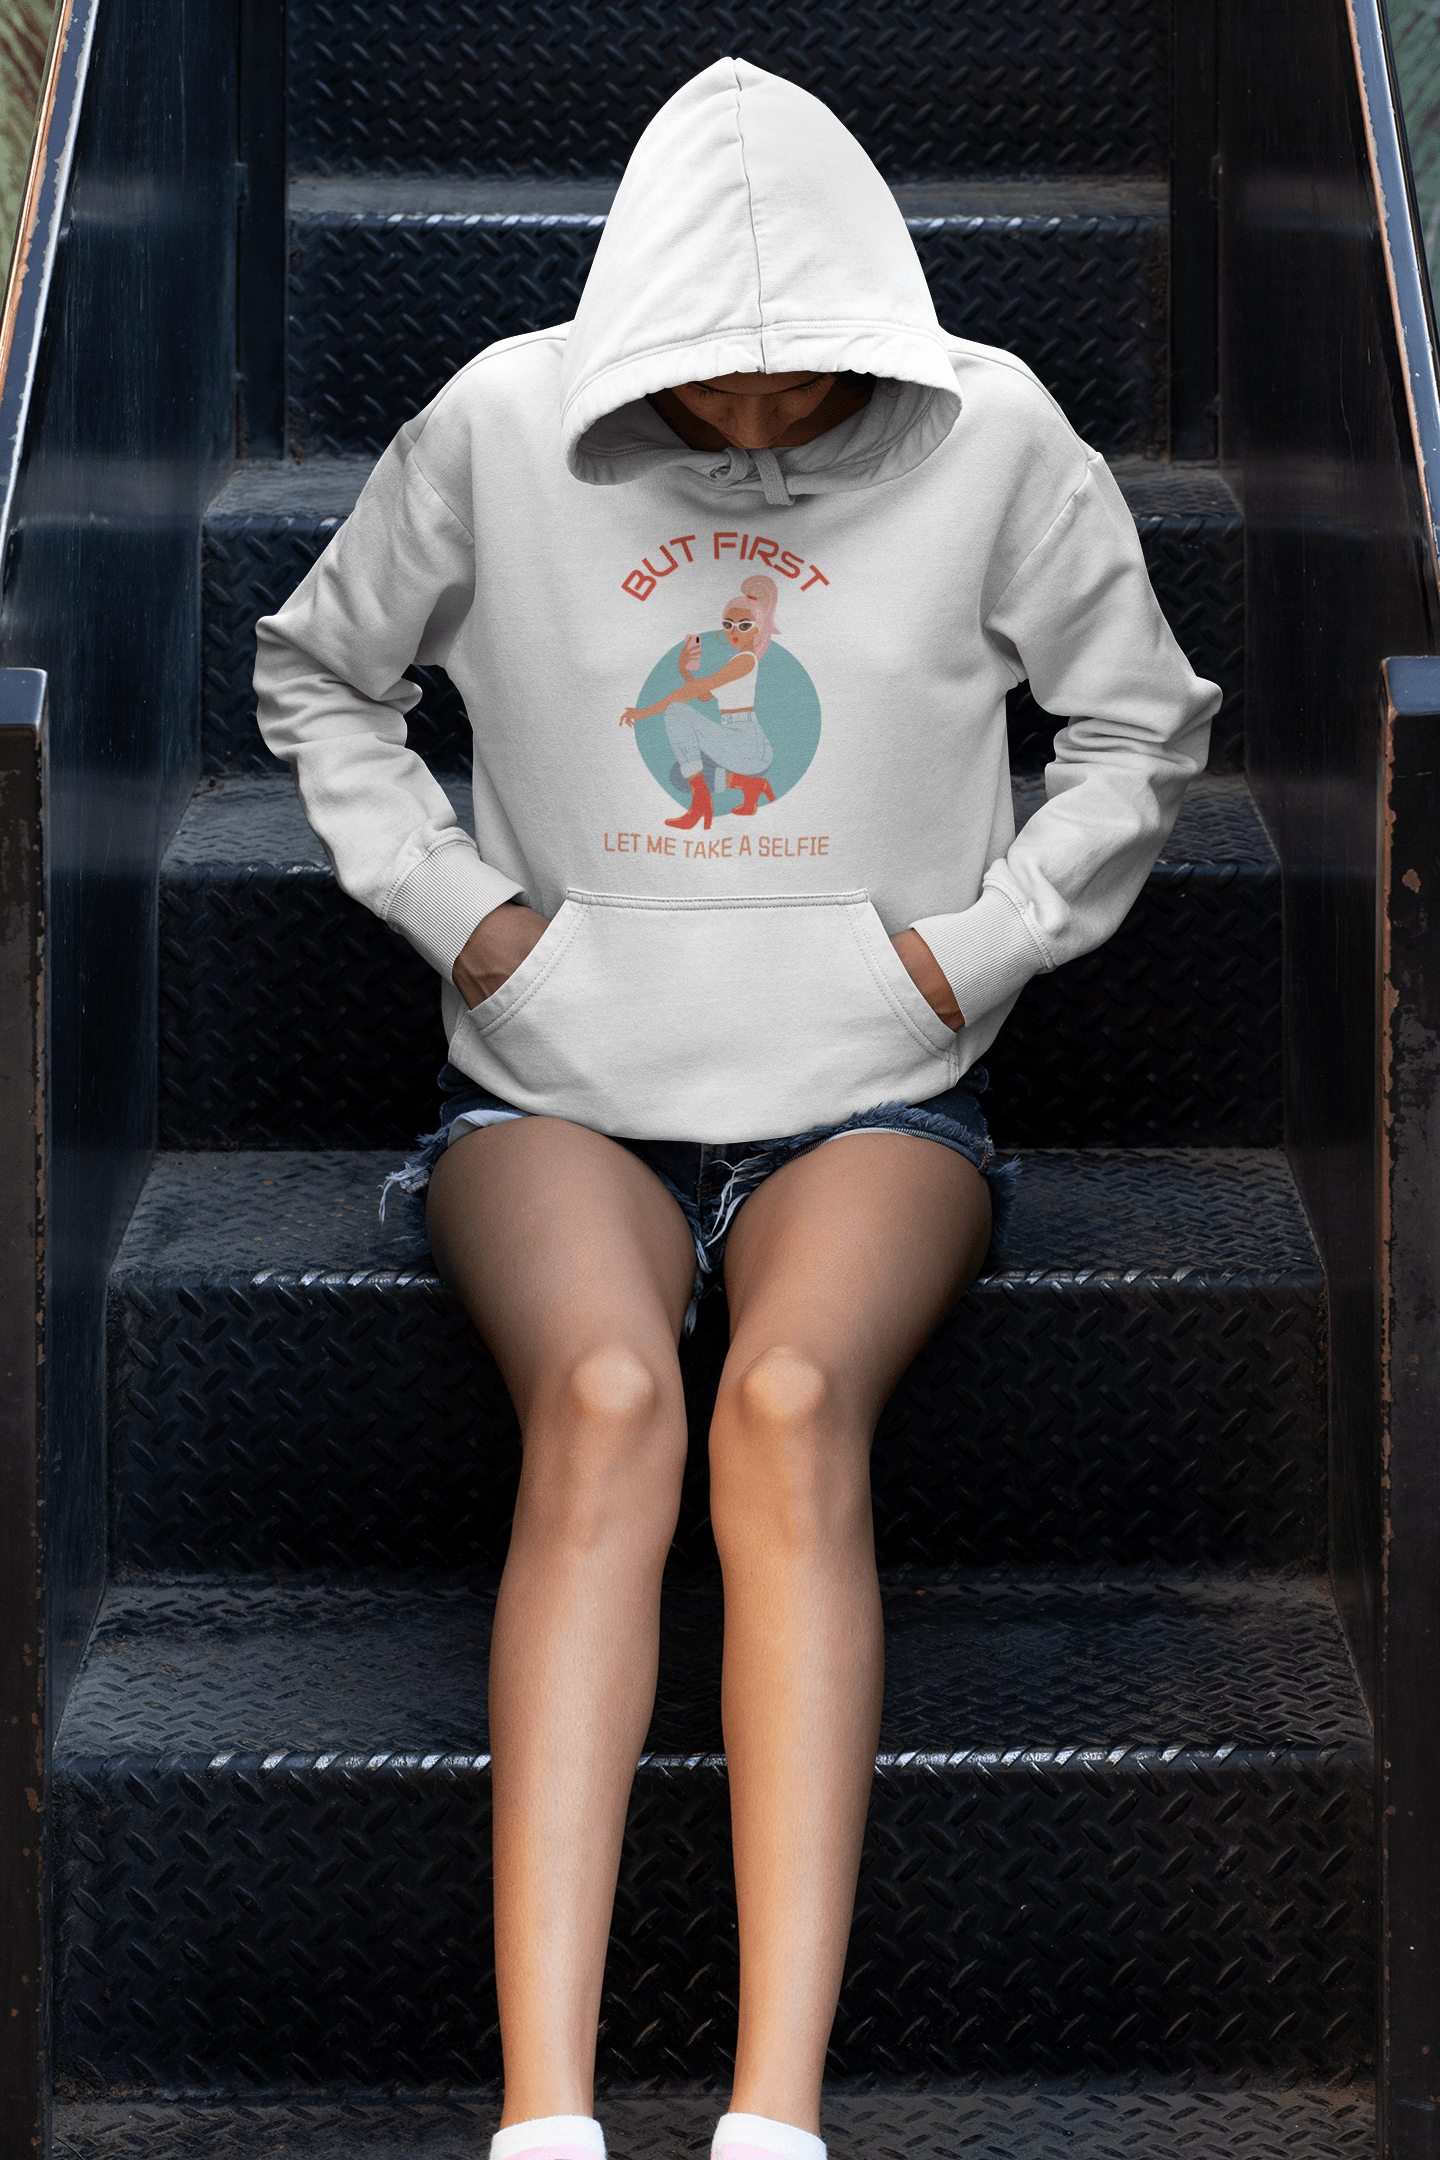 Selfie First Hooded Sweatshirt - The Accessorys Official